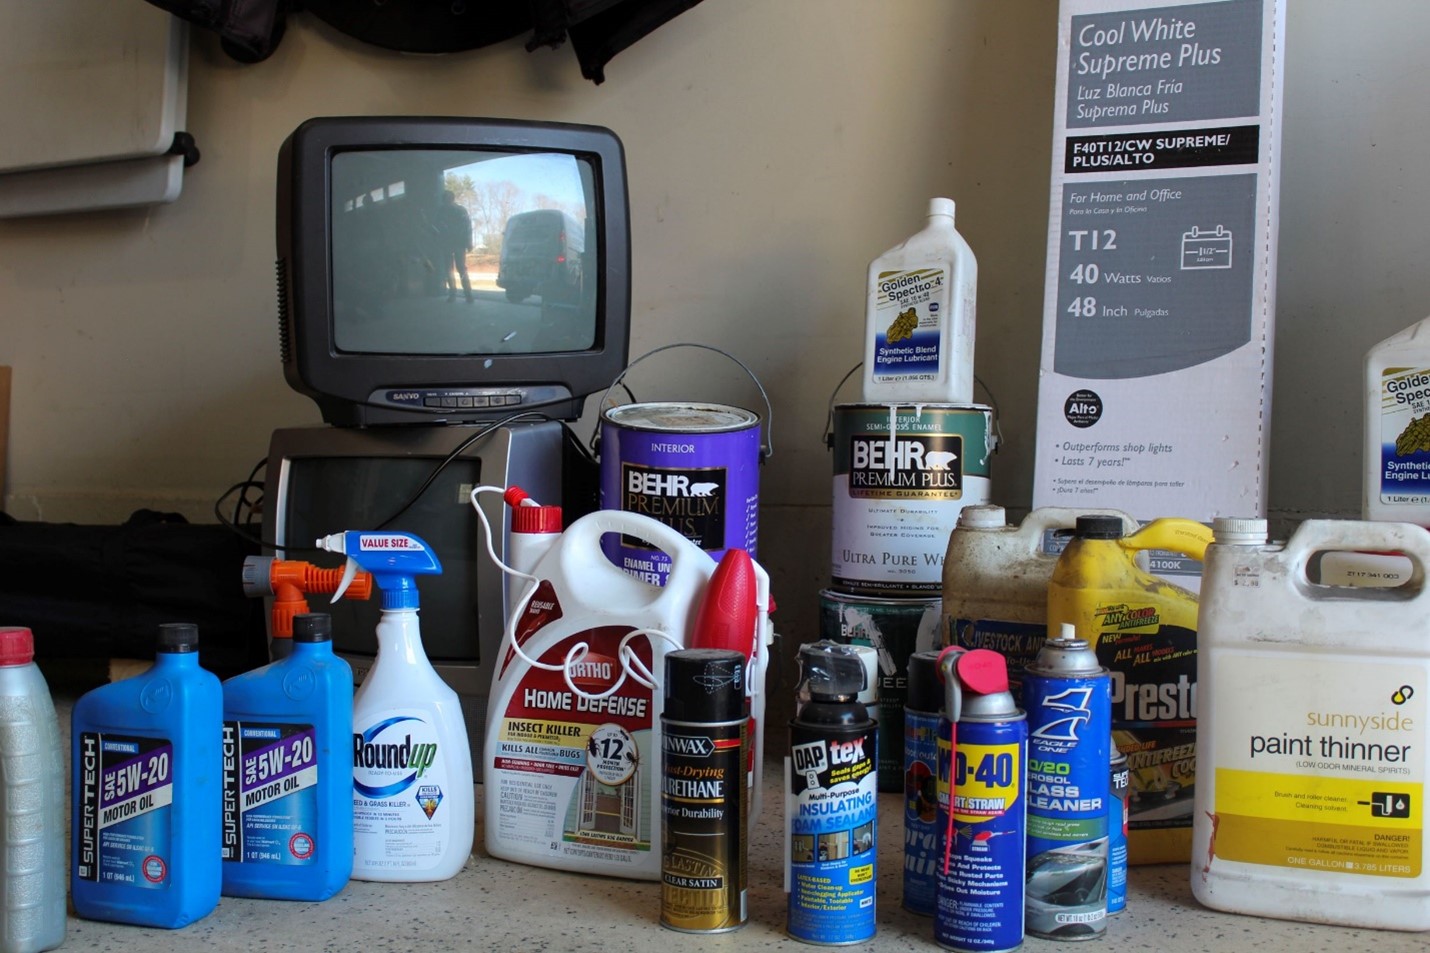 Chemical cleaning products, paint thinner, e-waste, and several other hazardous materials